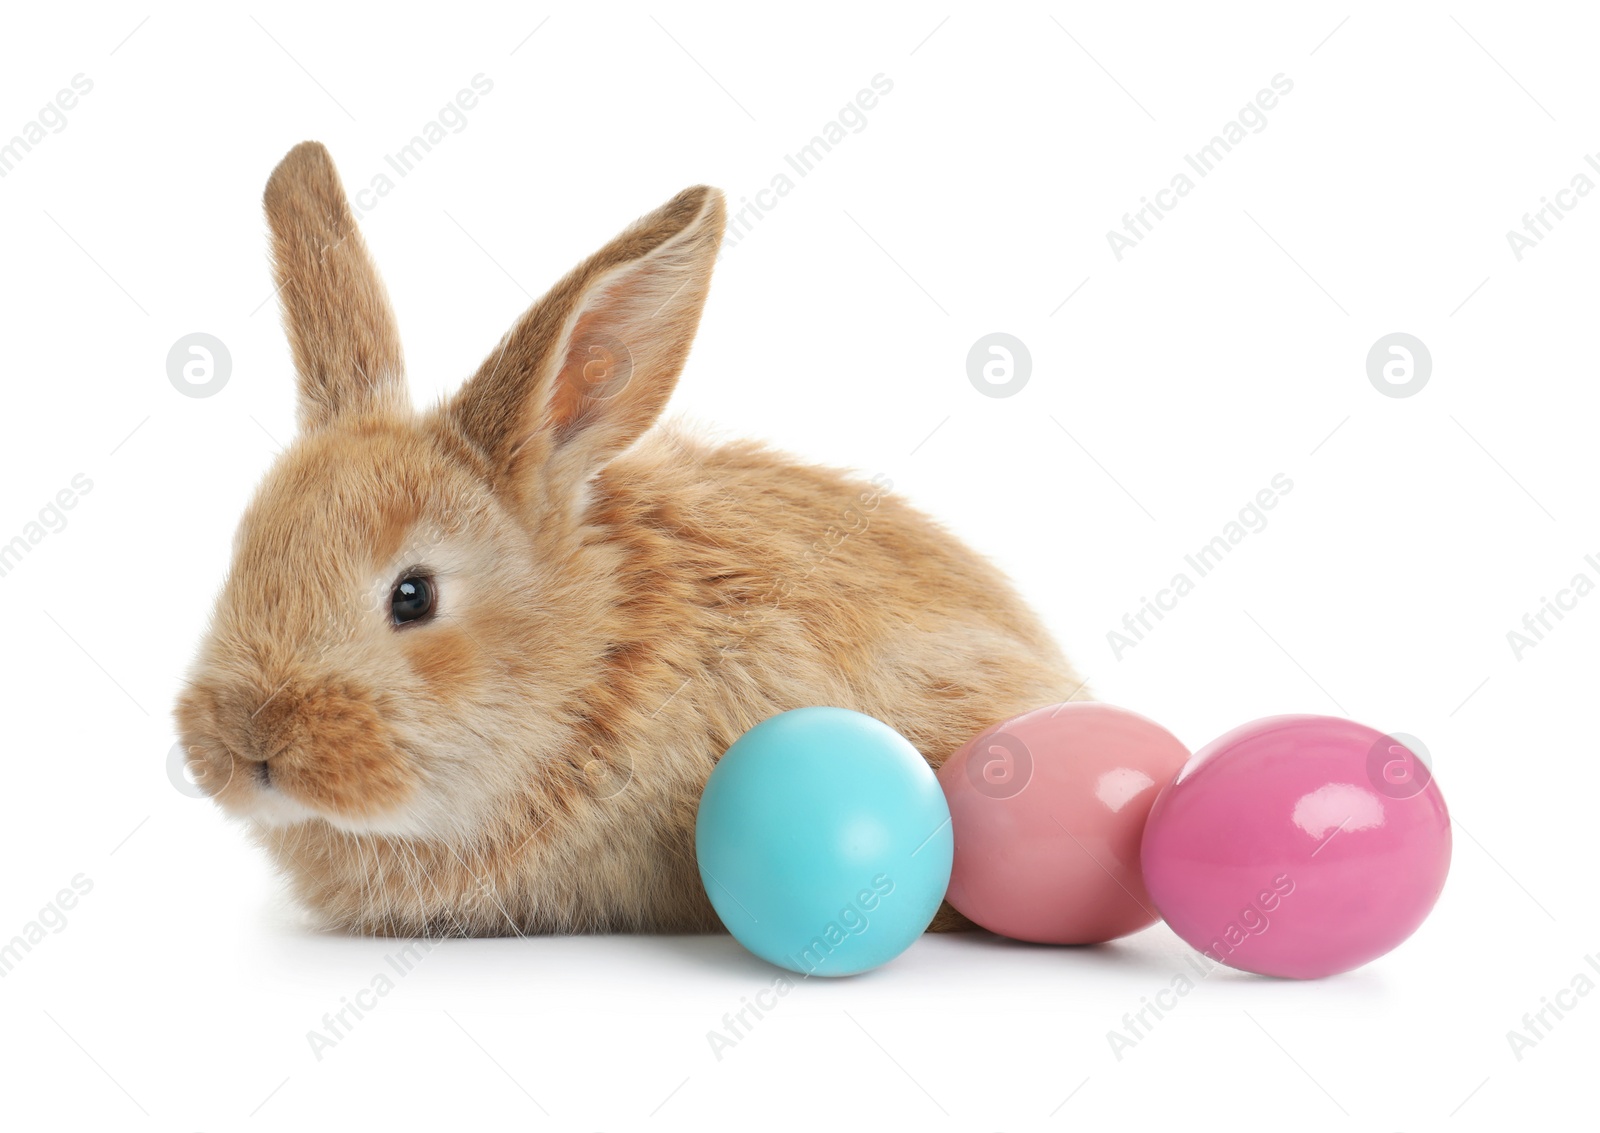 Photo of Adorable furry Easter bunny and colorful eggs on white background